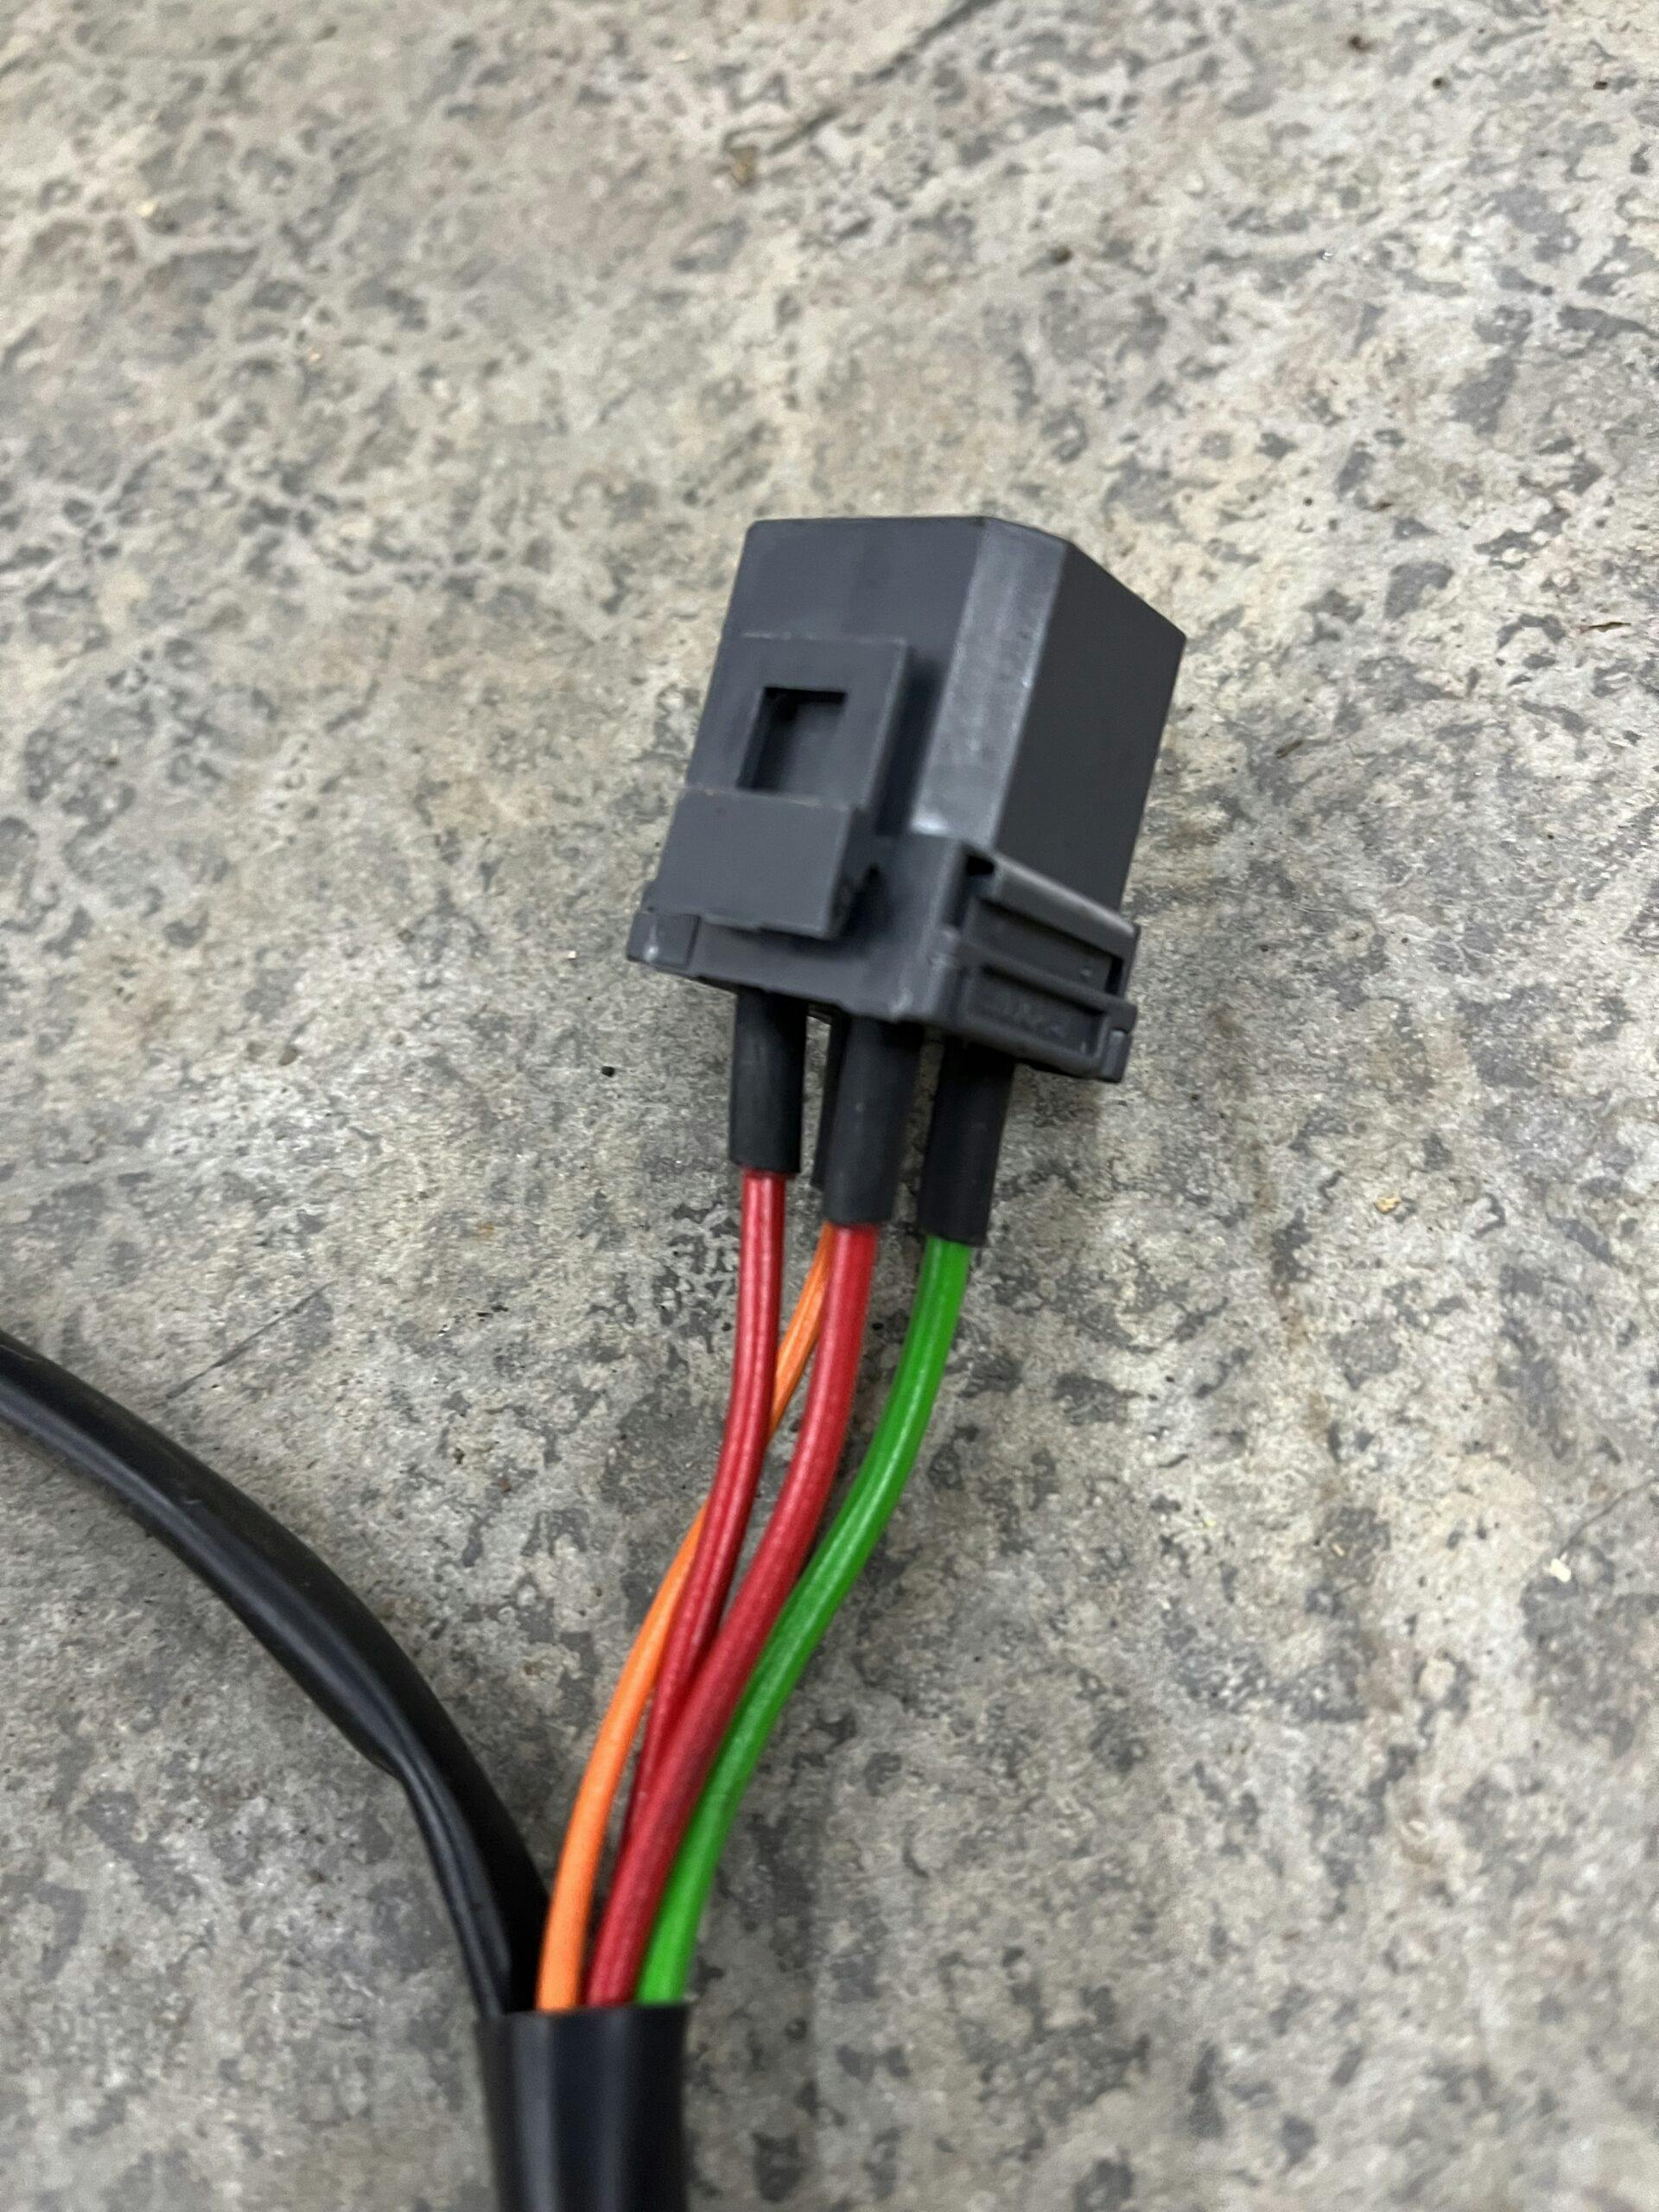 DIY car electrical wiring connection